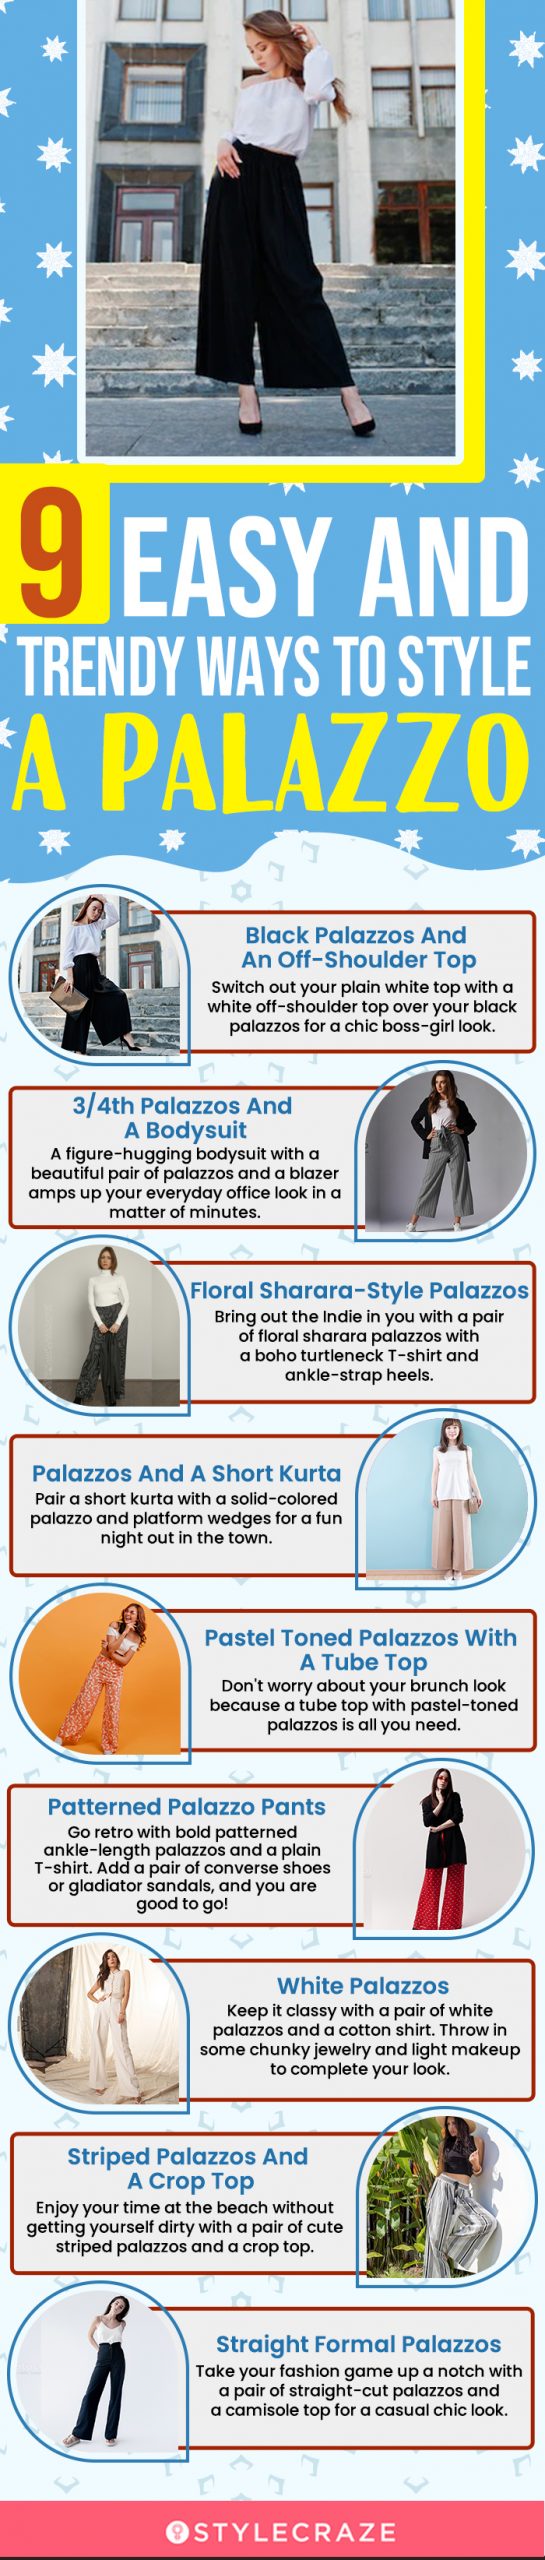 9 easy and trendy ways to style a palazzo (infographic)